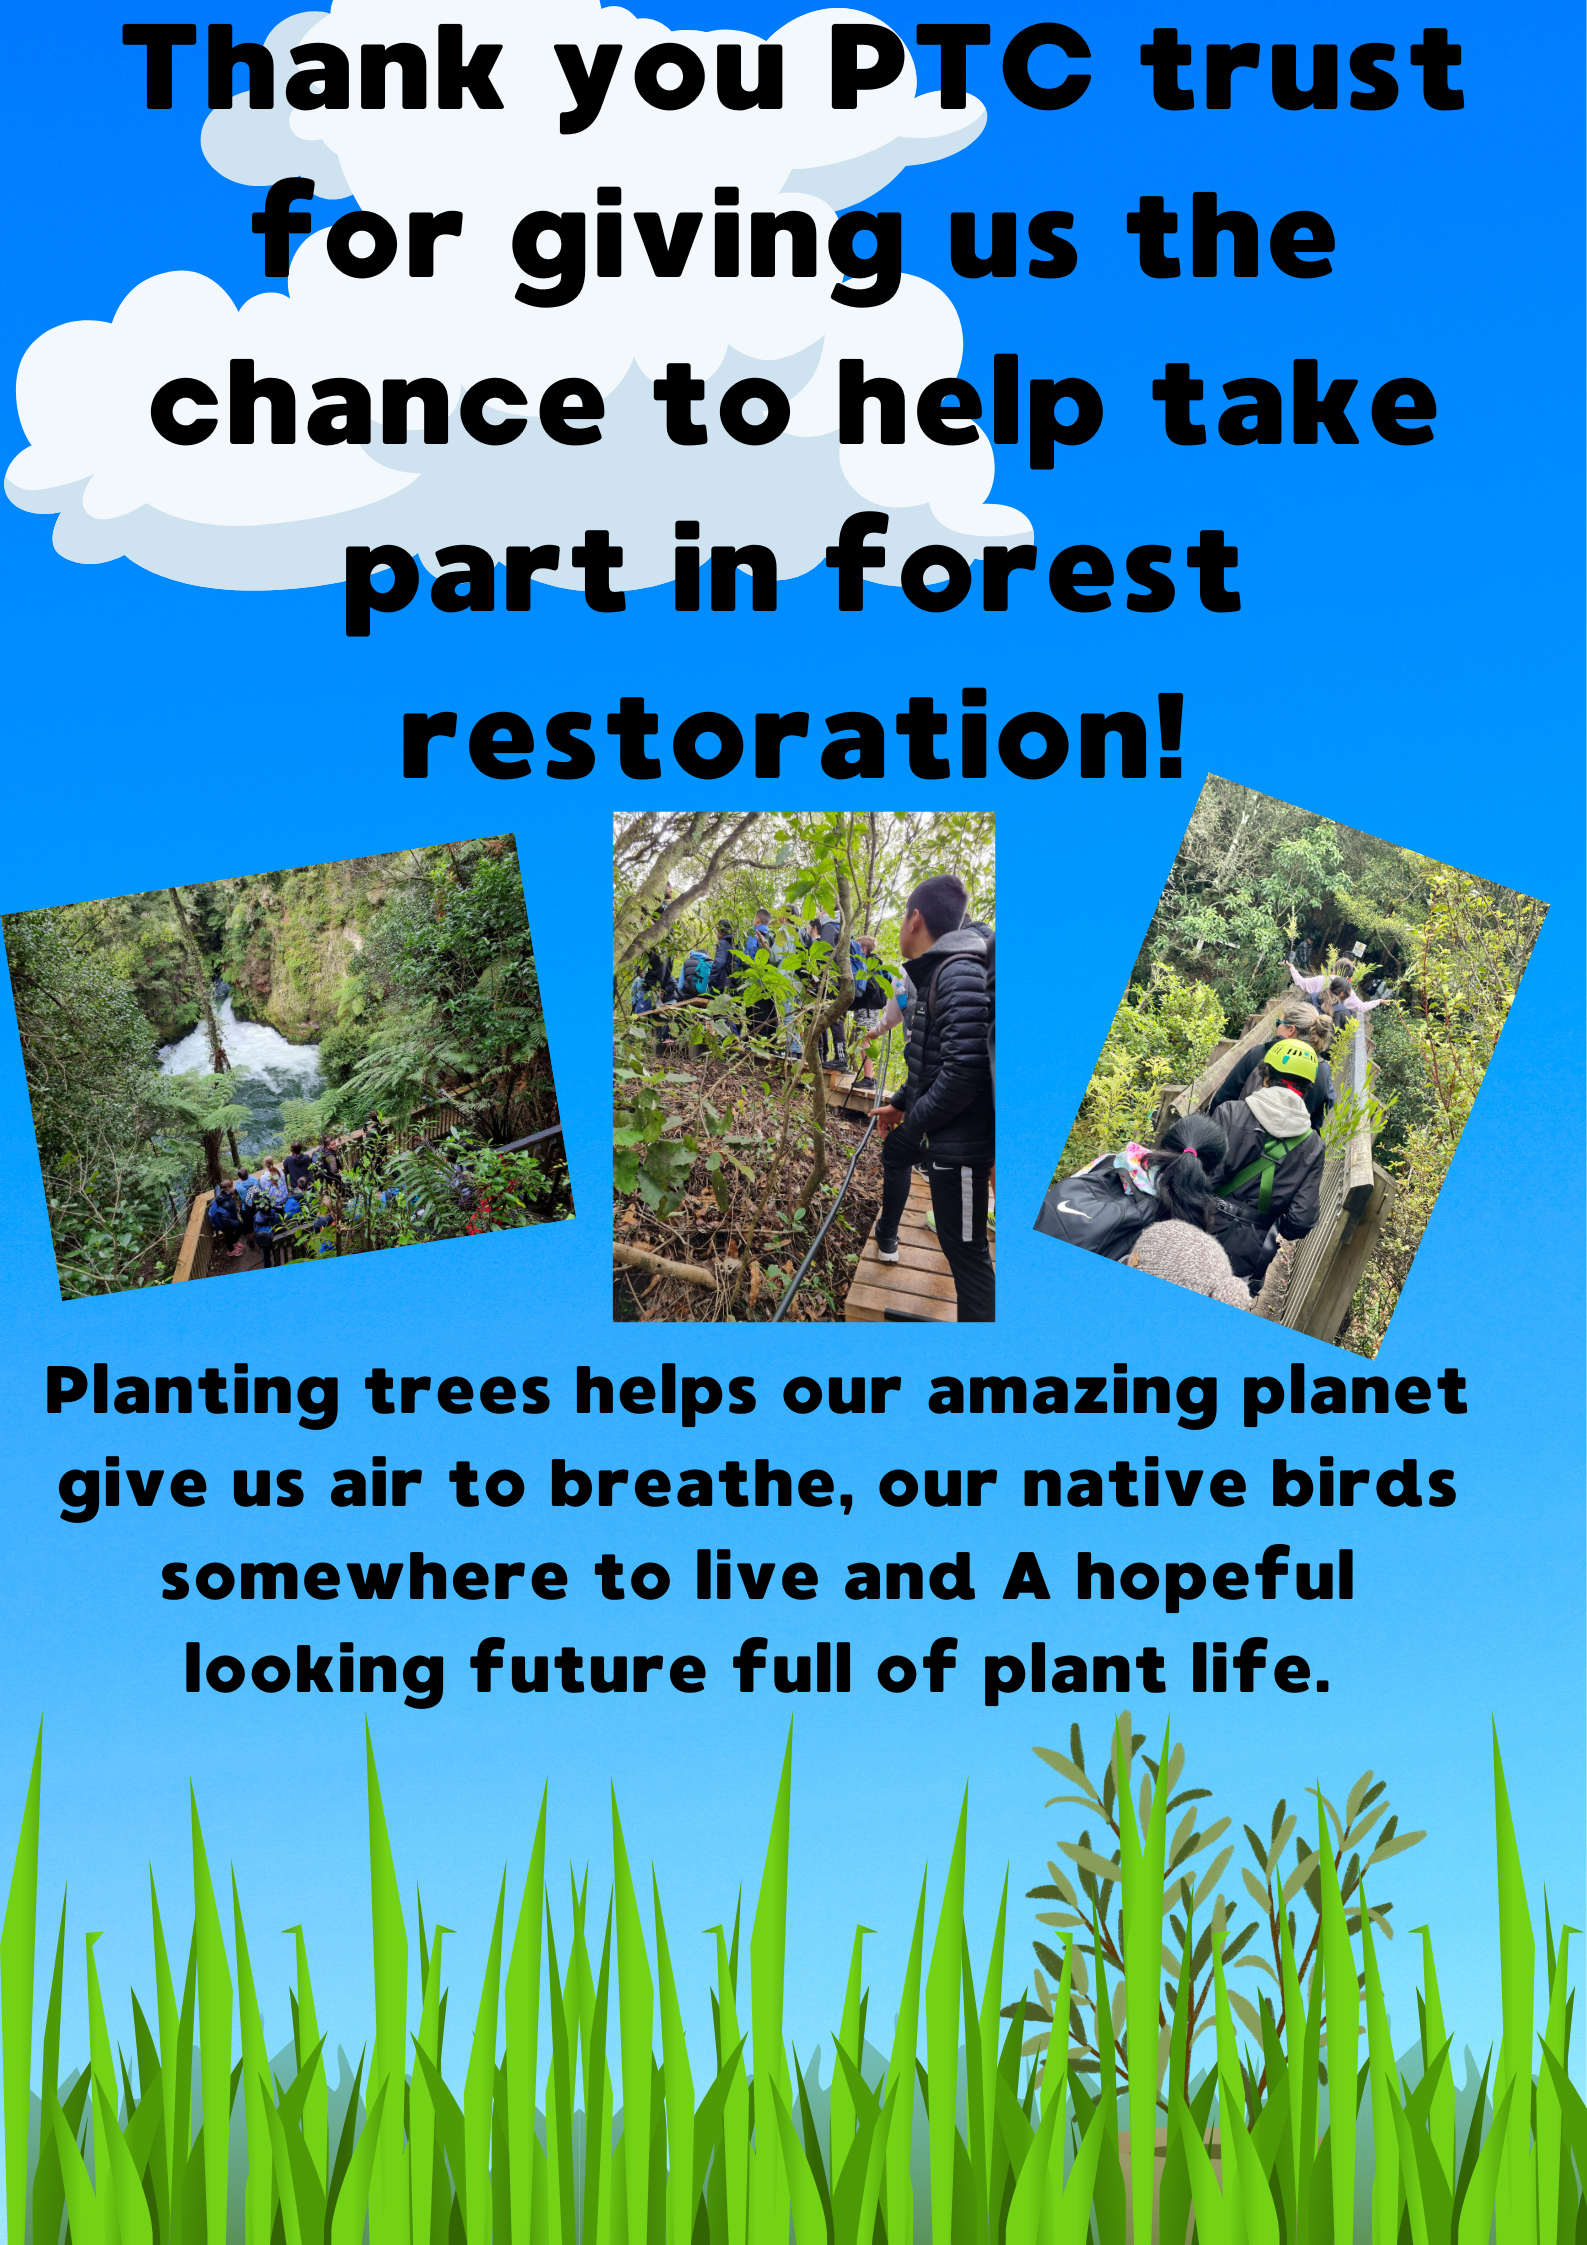 Thank you PTC trust for giving us the chance to help save the environment.png